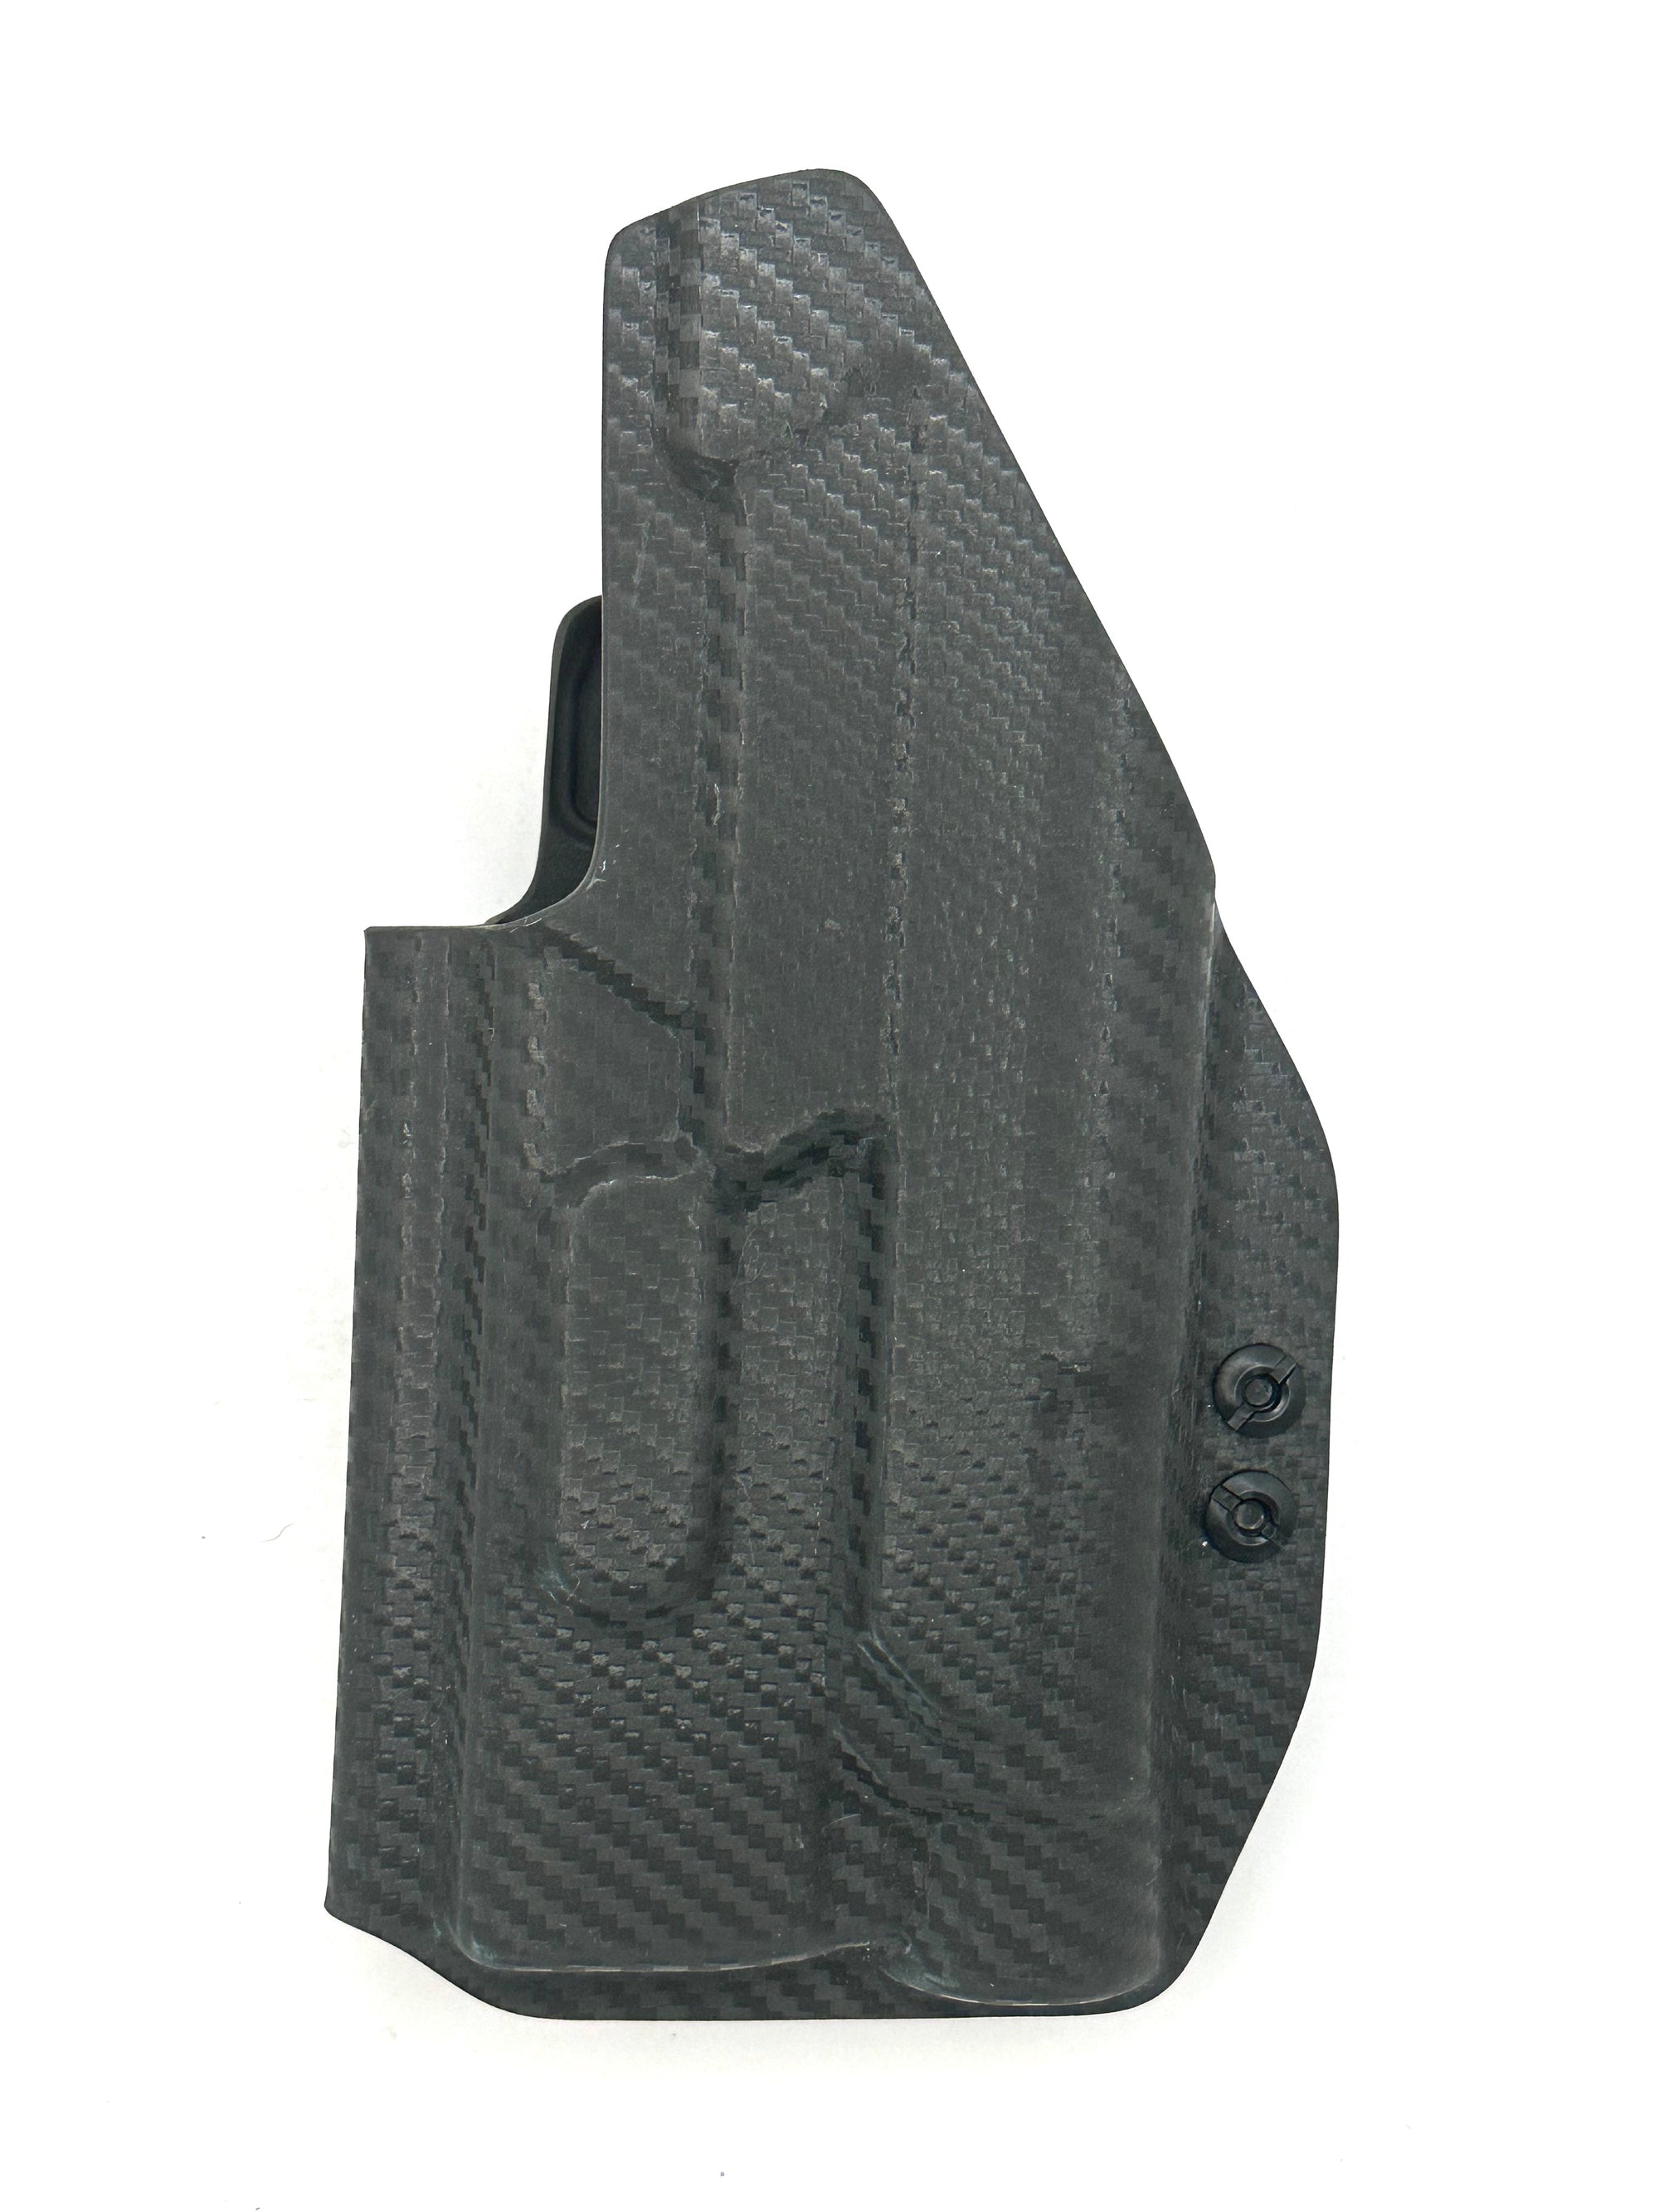 GS-50 Compatible with Glock 19 with TLR1  - IWB Sirius Holster - Black Carbon Fiber